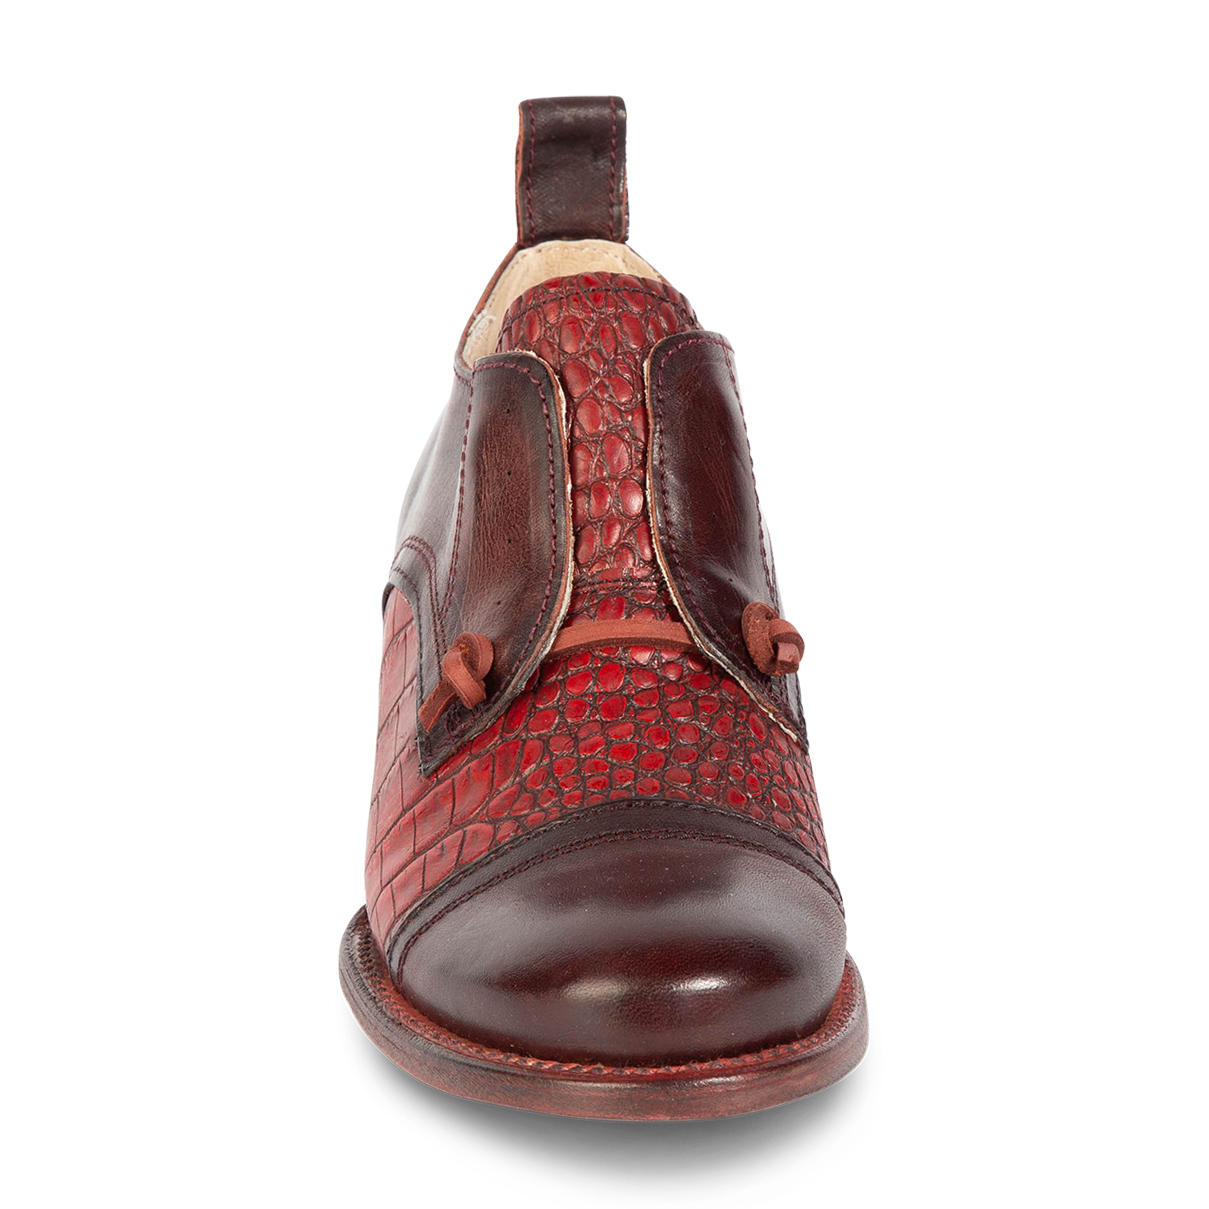 Front view showing decorative knotted leather lace and hidden elastic around tongue on FREEBIRD women's Mabel wine multi shoe